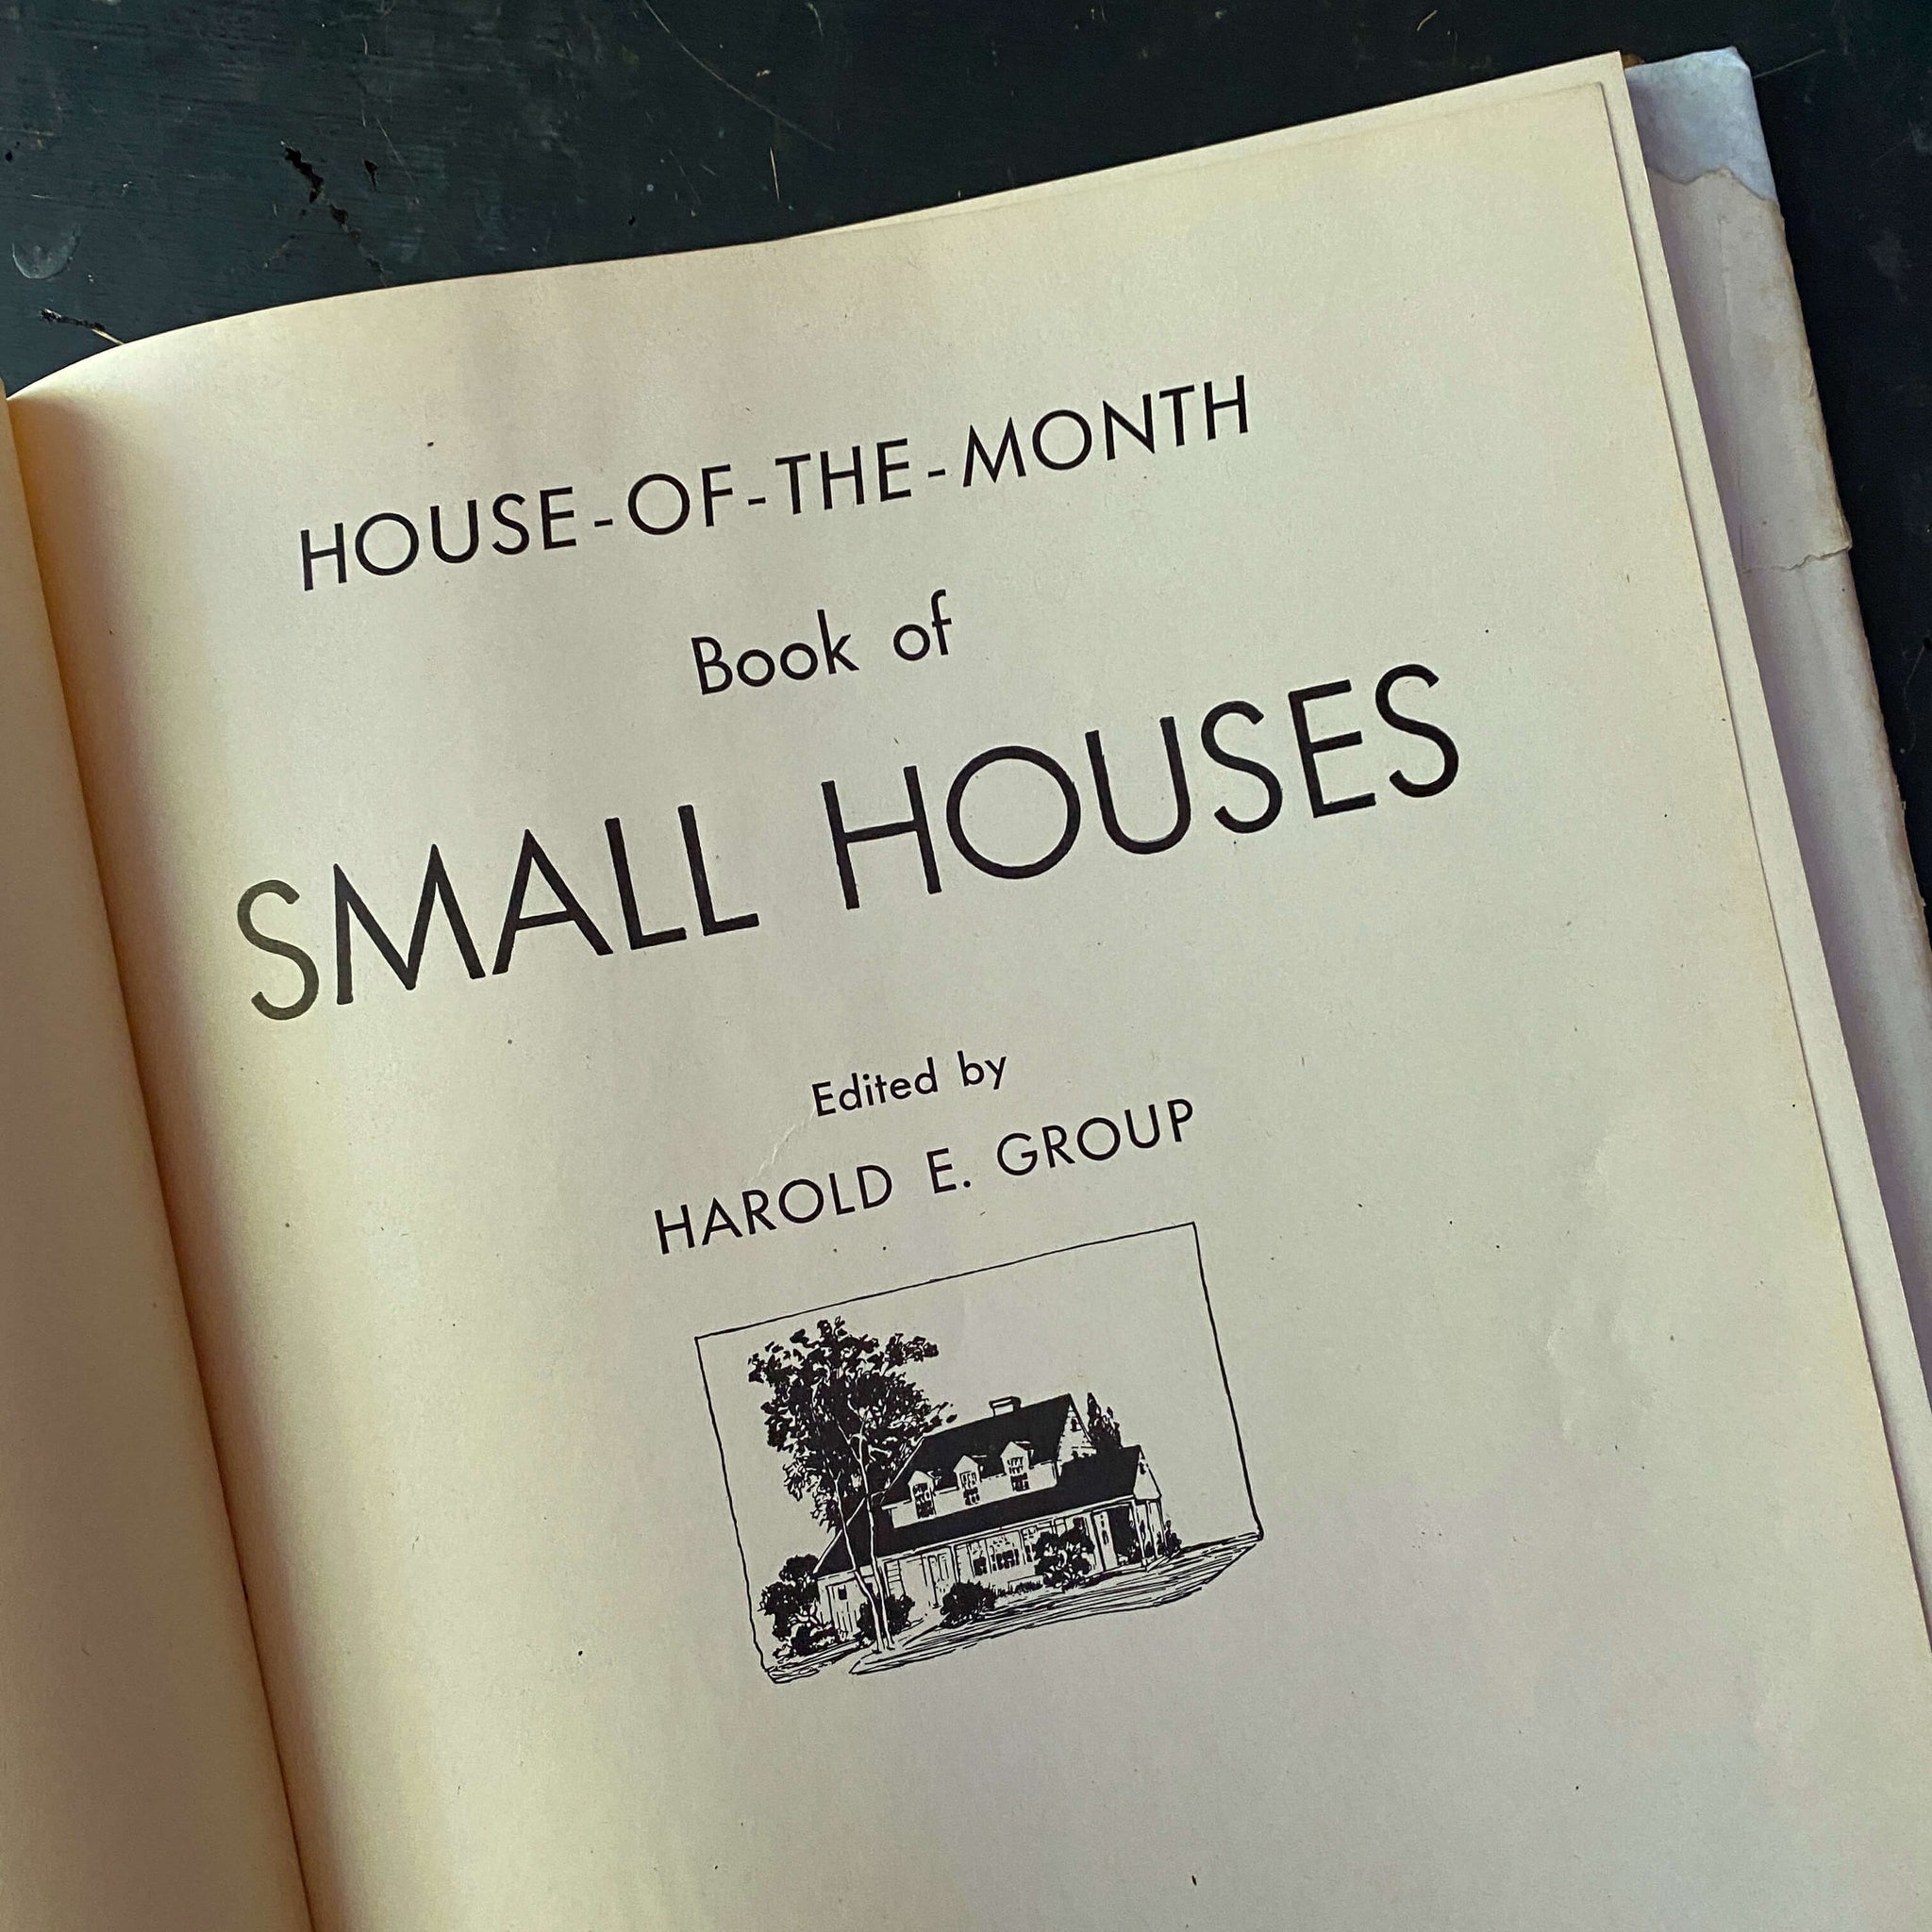 Vintage 1940s Book of Small Houses by Harold E. Group circa 1946